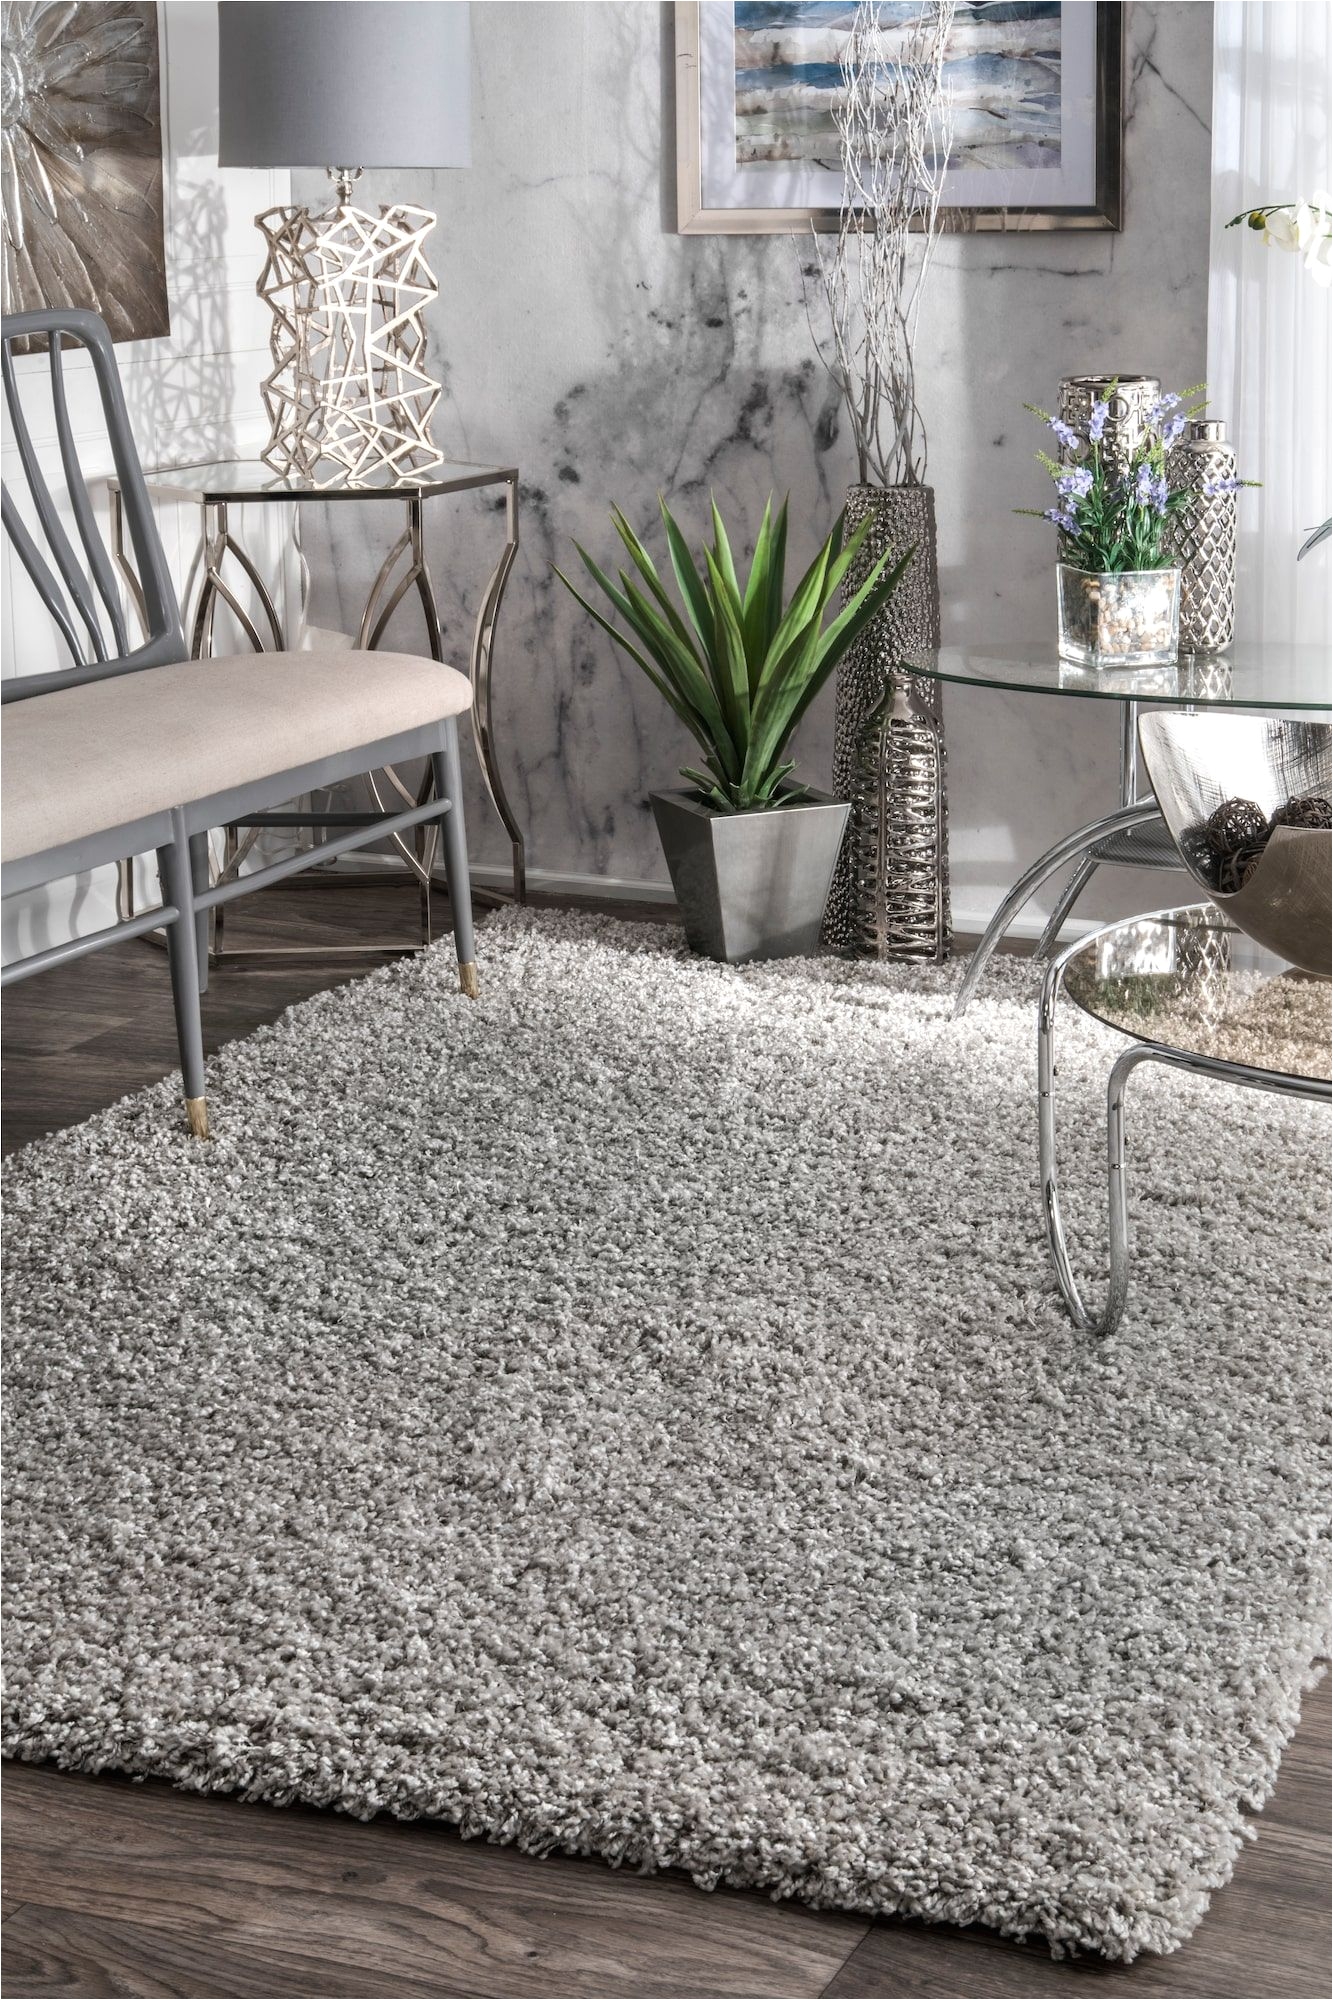 Pottery Barn Rugs Clearance the Rugs Usa Venice Shaggy Rug Offers Understated Elegance and